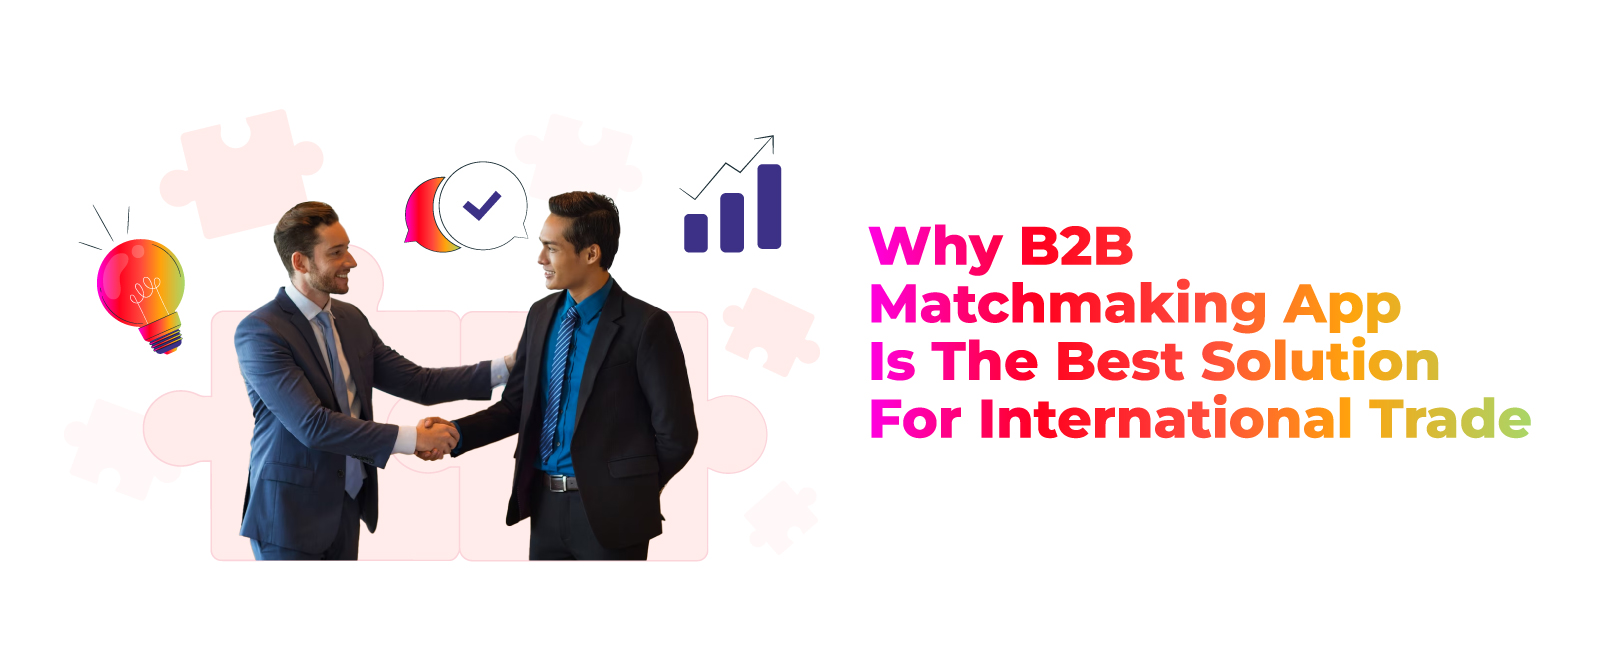 Why B2B Matchmaking App Is The Best Solution For International Trade